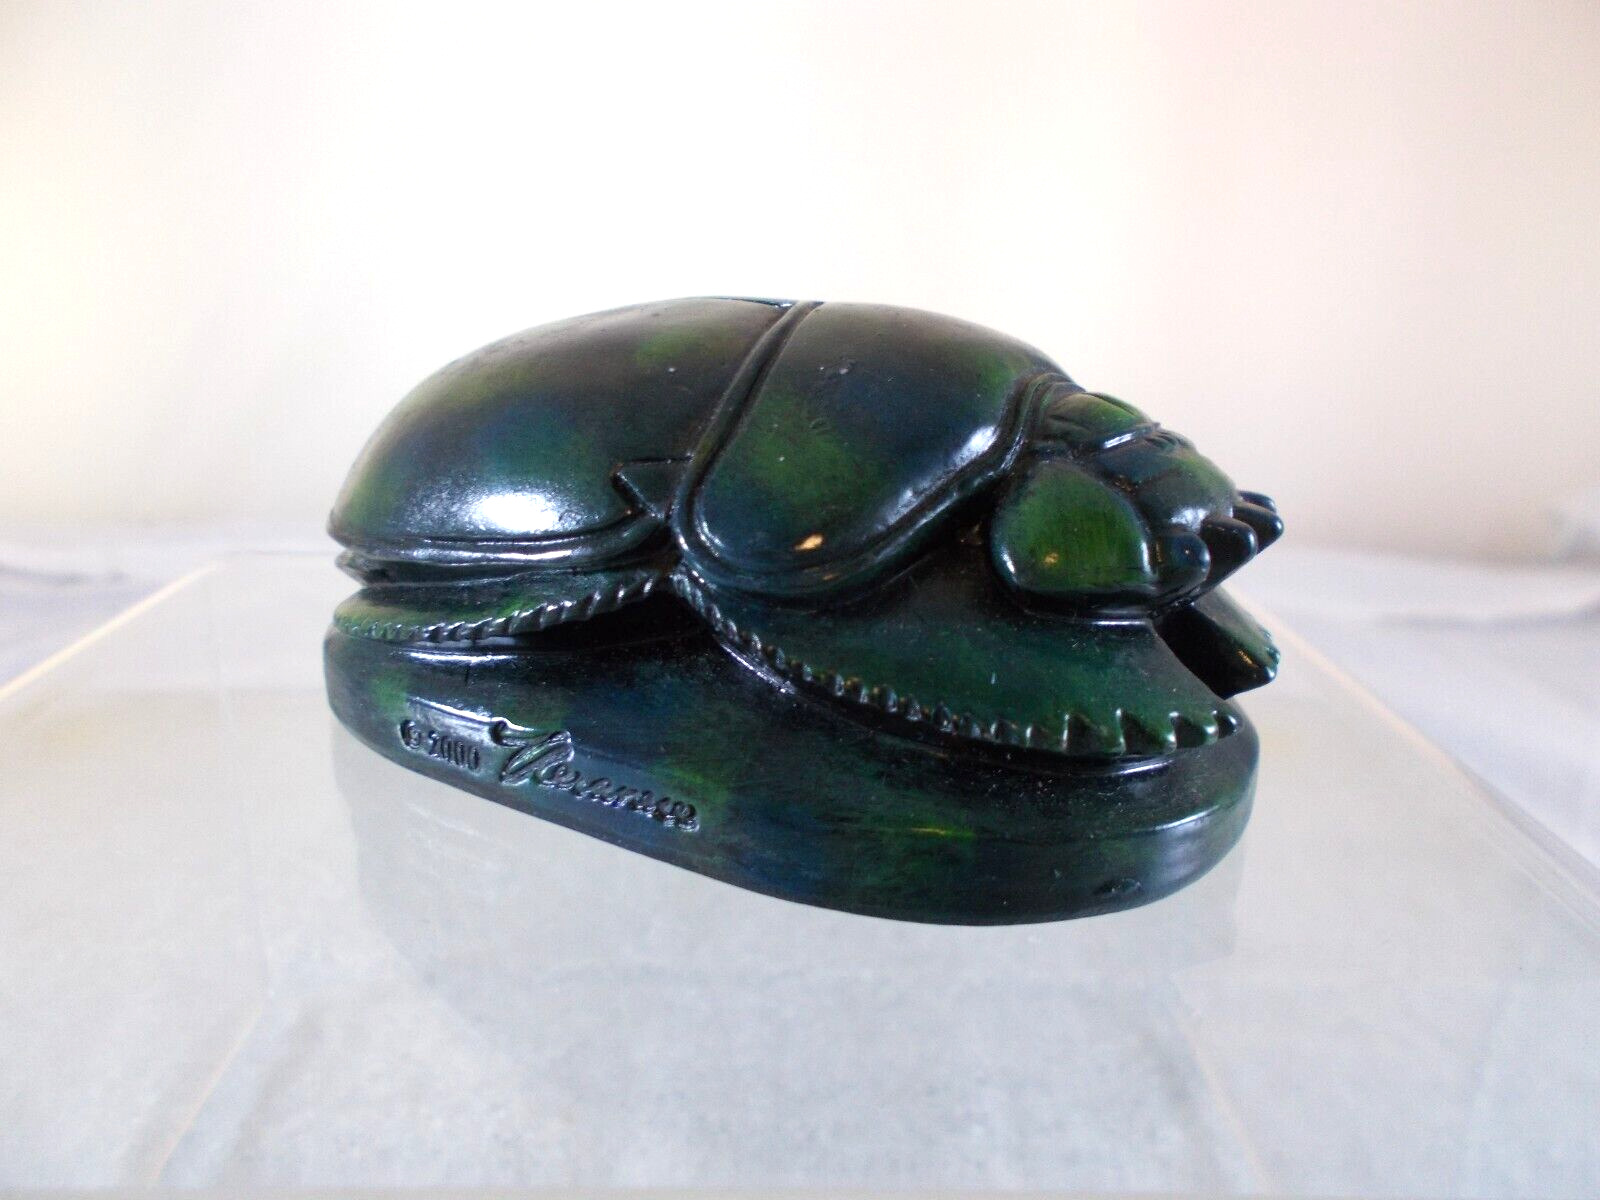 Signed Veronese Green Resin Egyptian Scarab Beetle Paperweight with Hieroglyphs